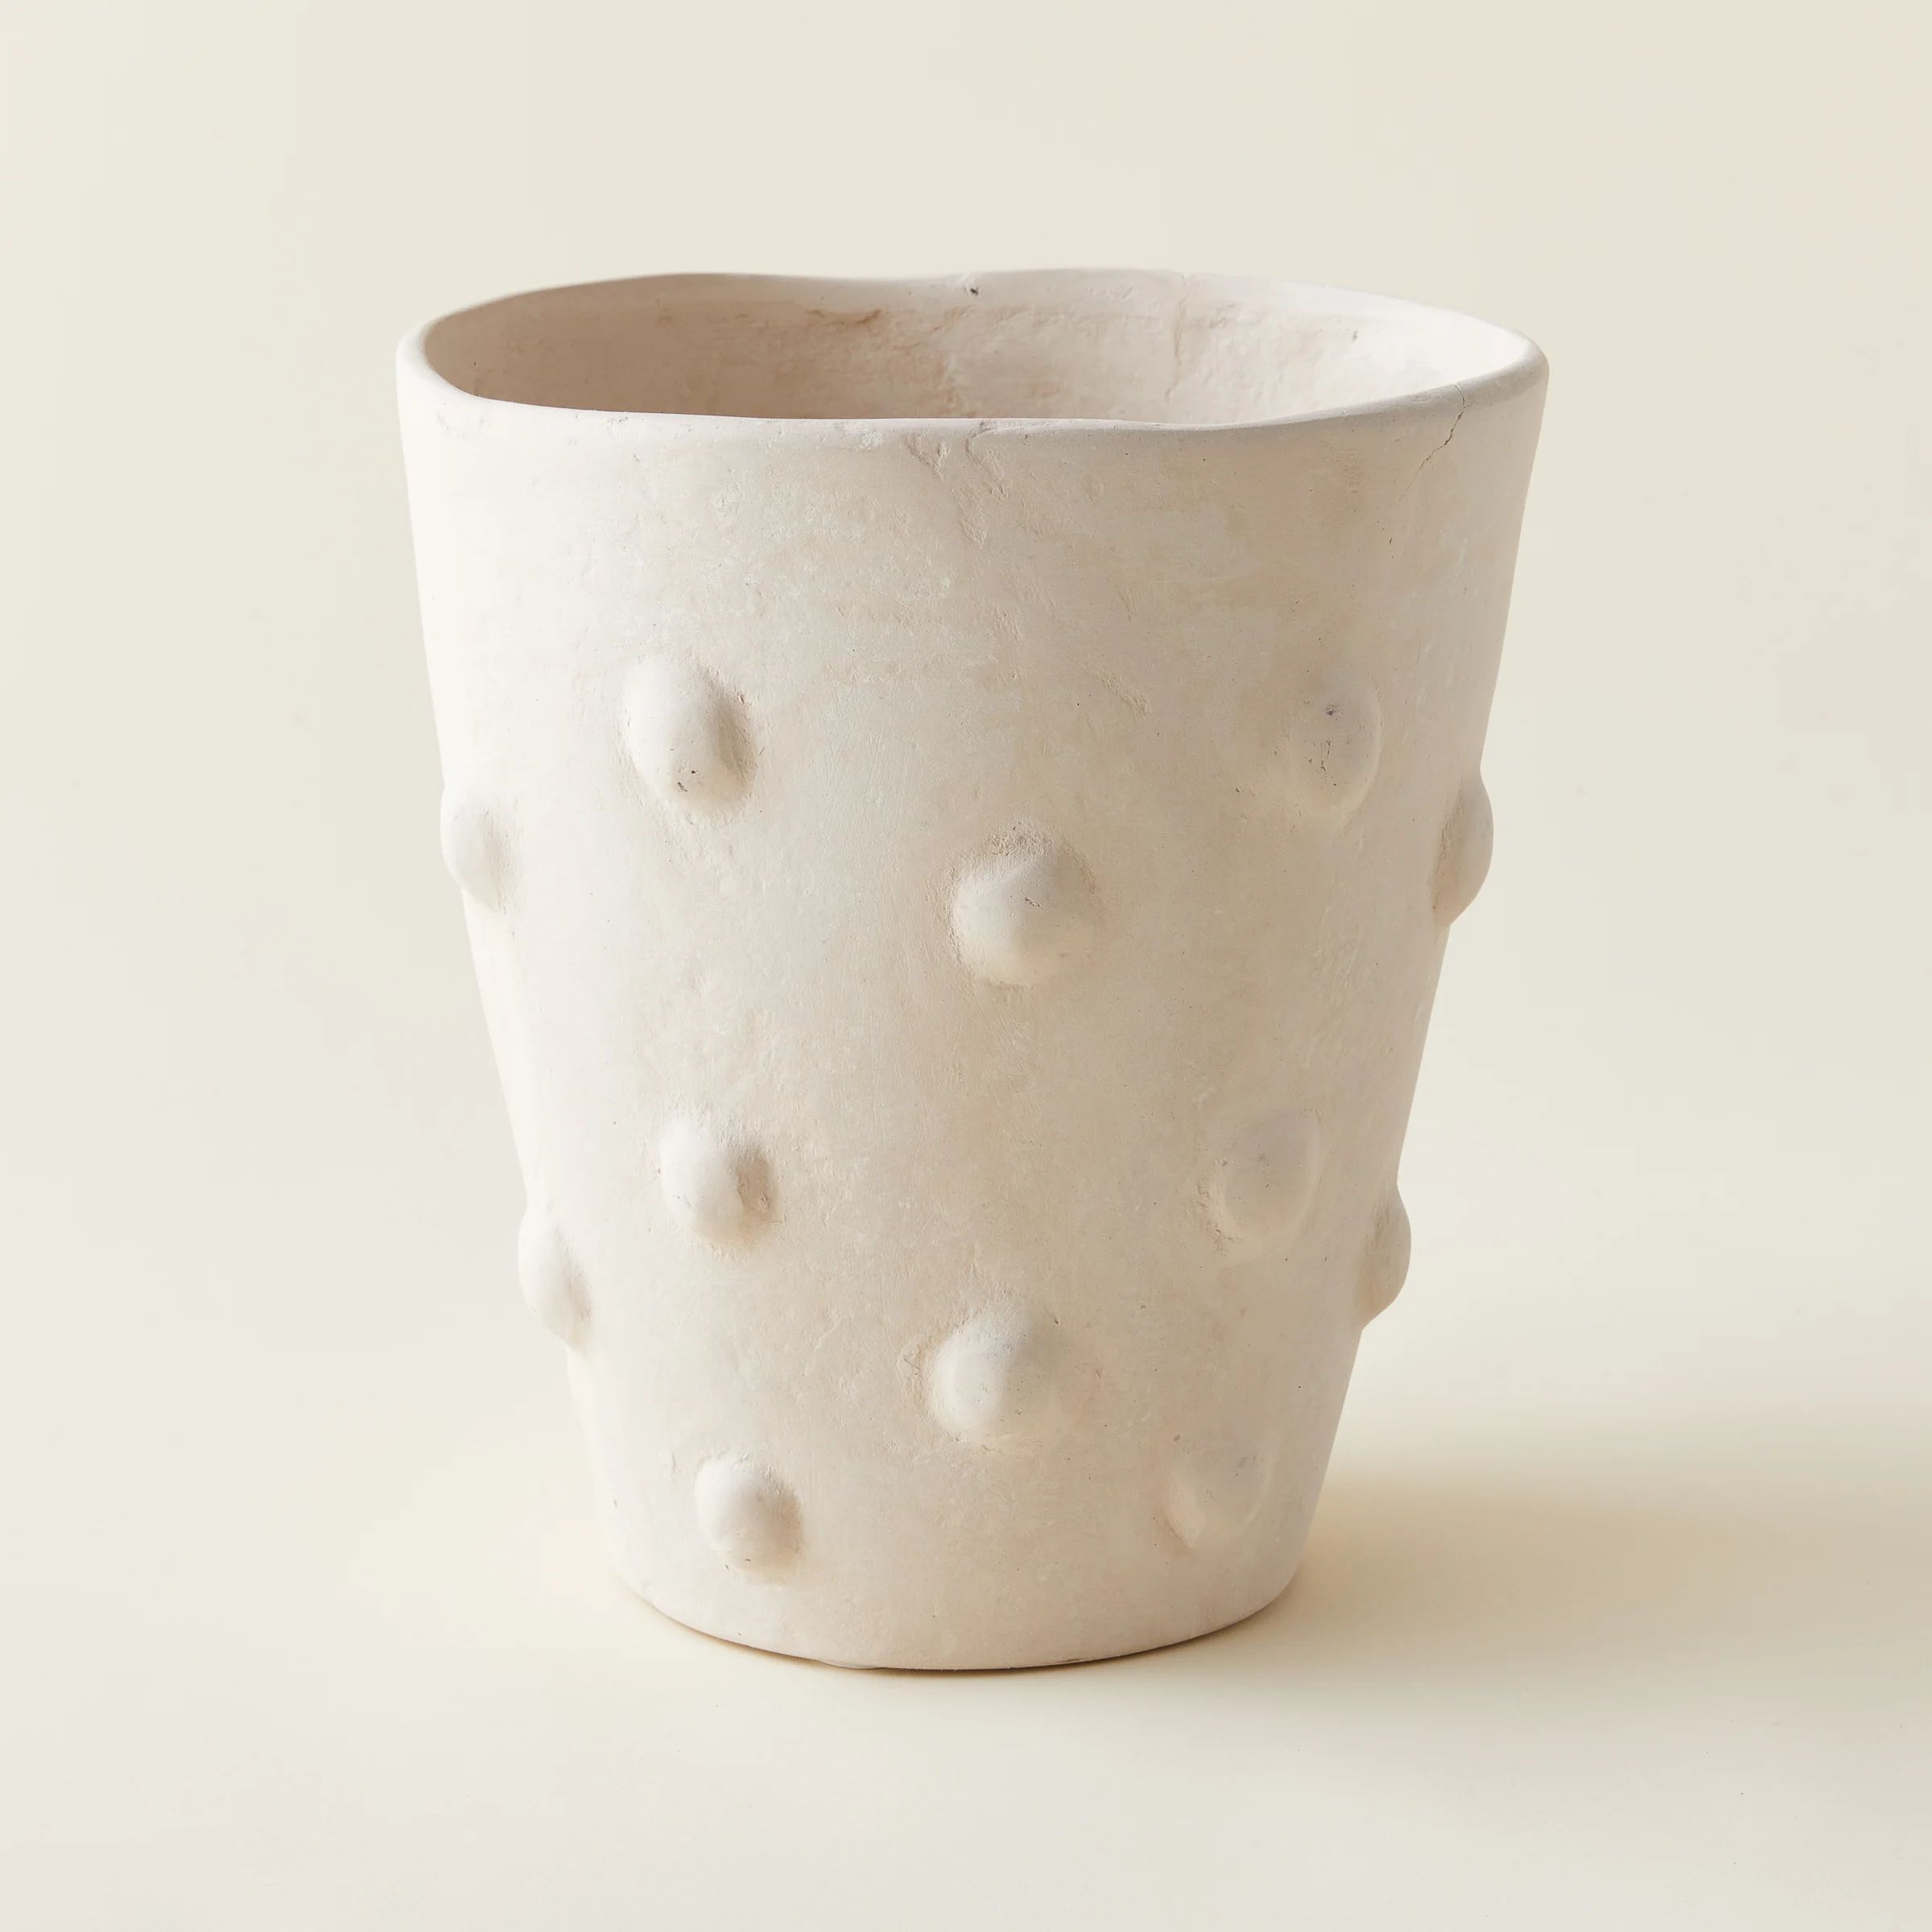 Dotted Paper Mache Vase | Kate Marker Home